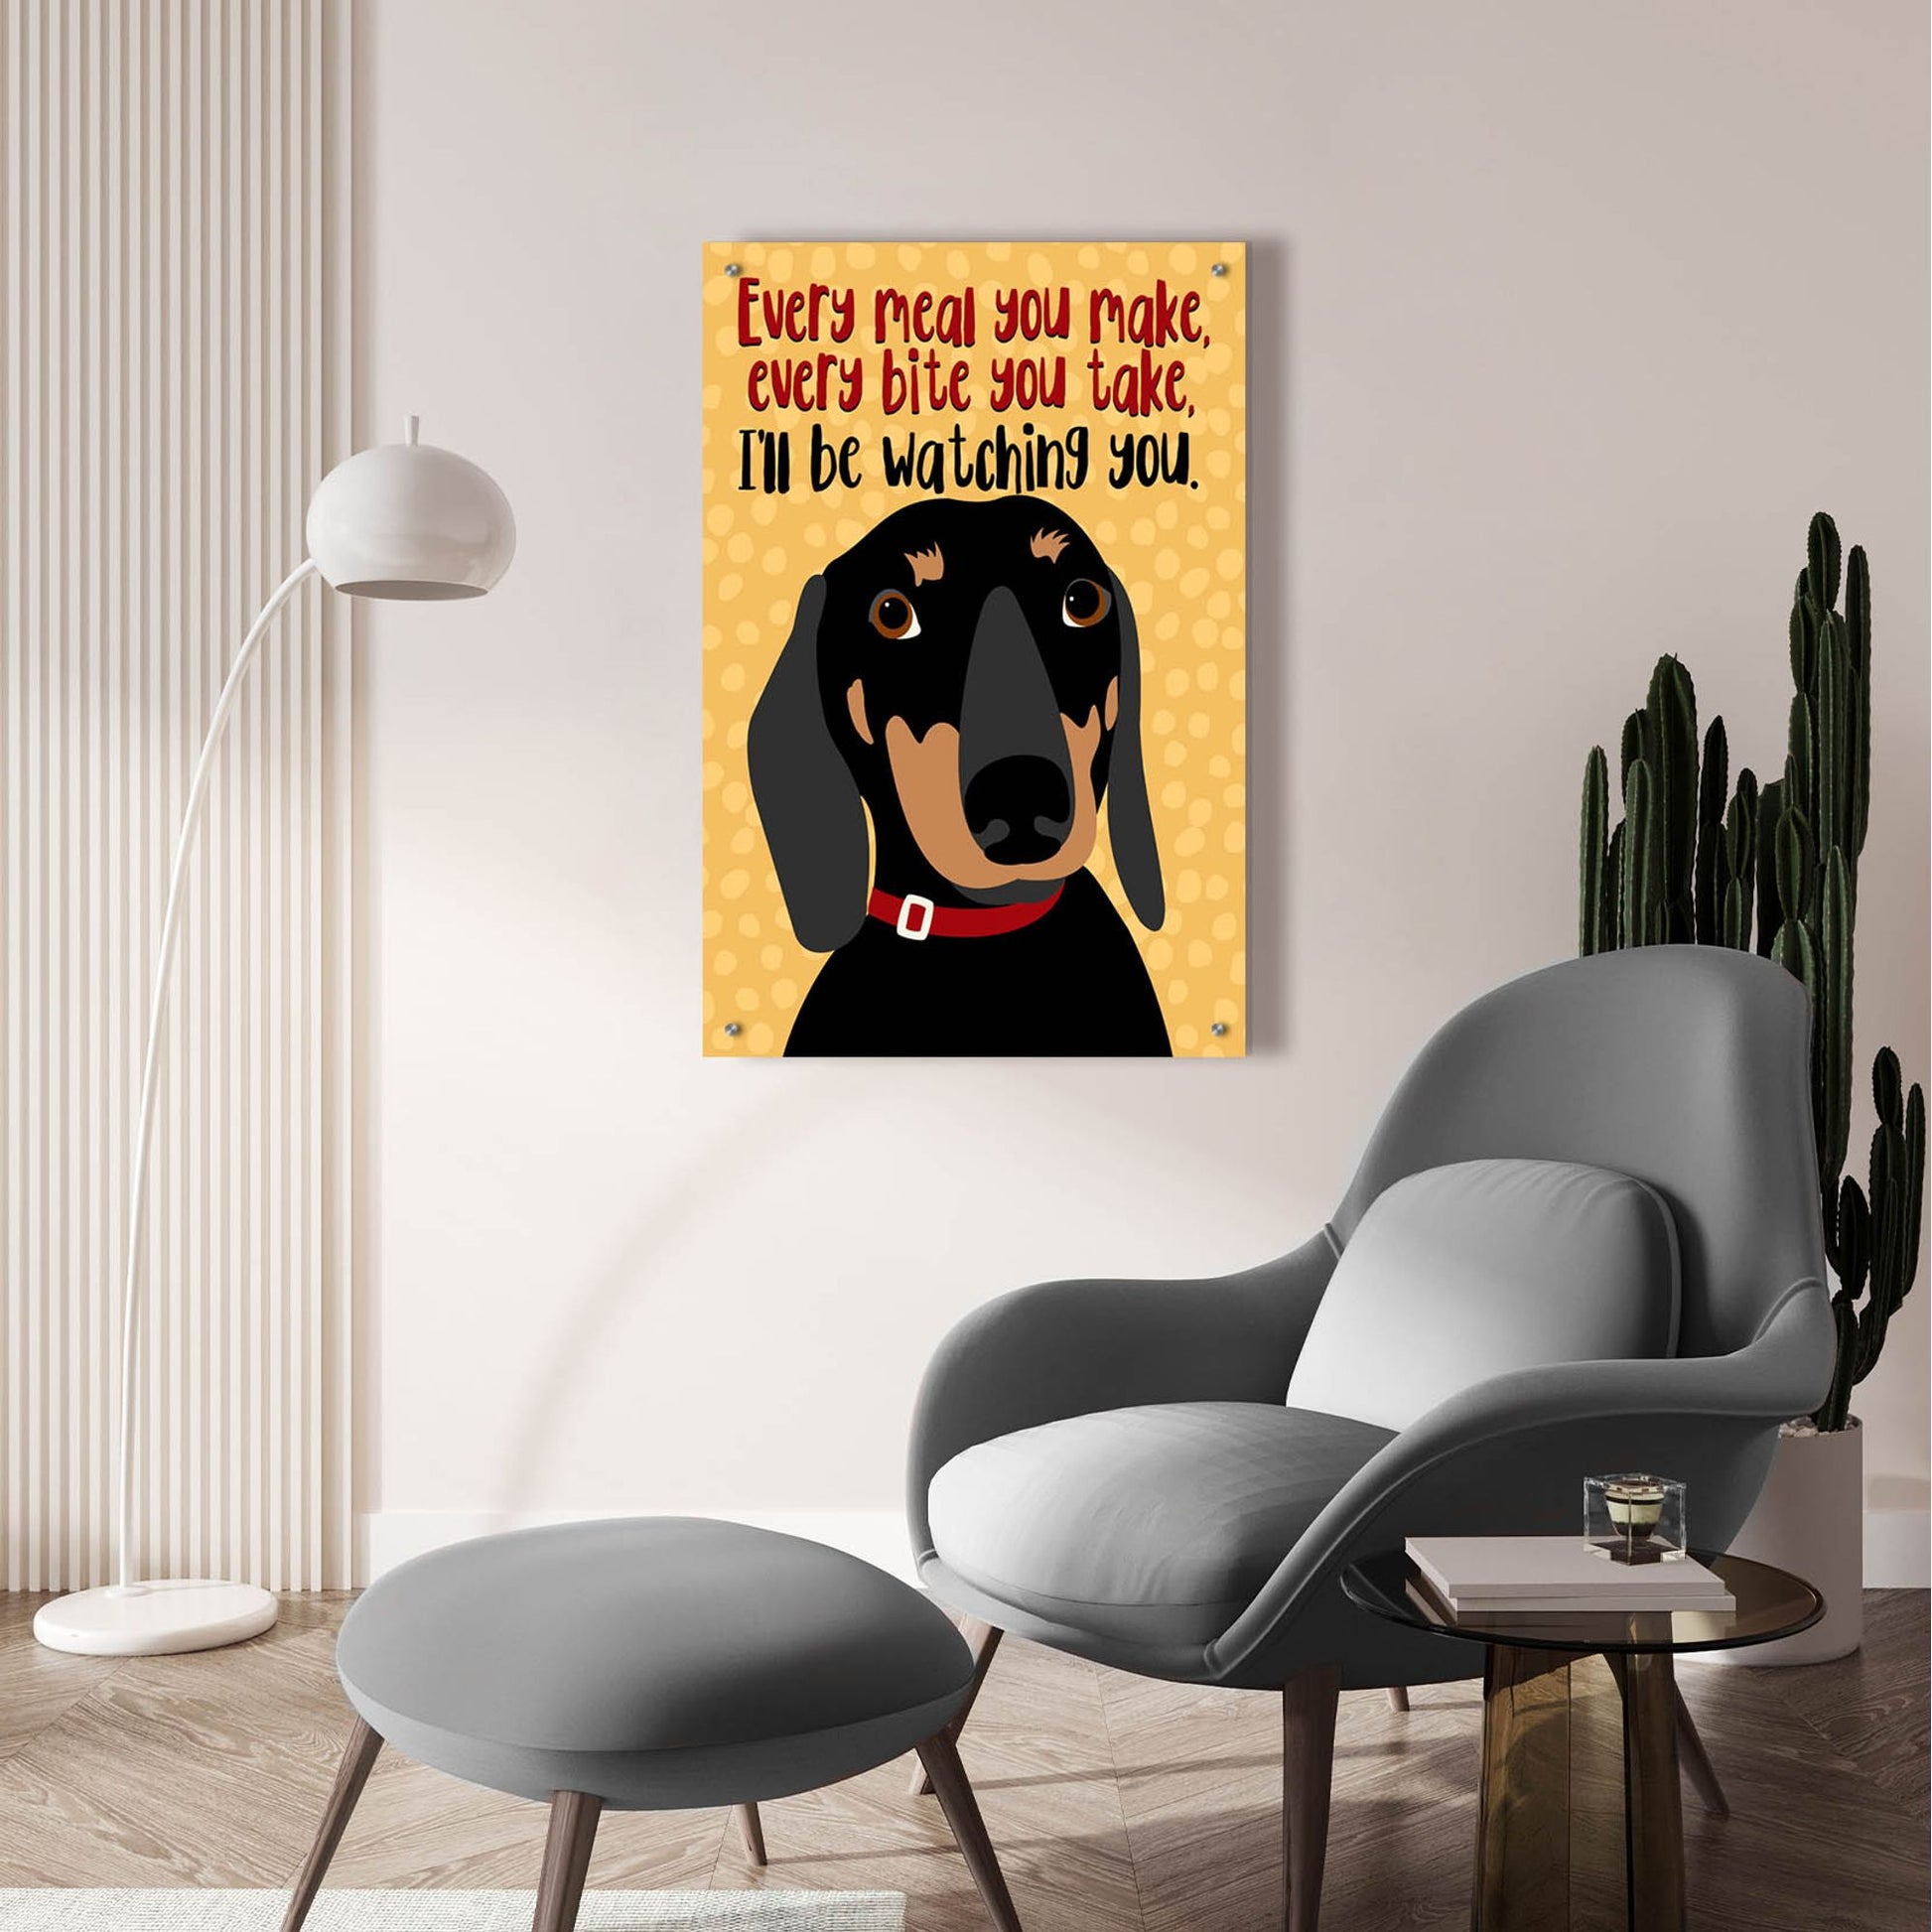 Epic Art 'Dachshund Every Meal You Make' by Ginger Oliphant, Acrylic Glass Wall Art,24x36